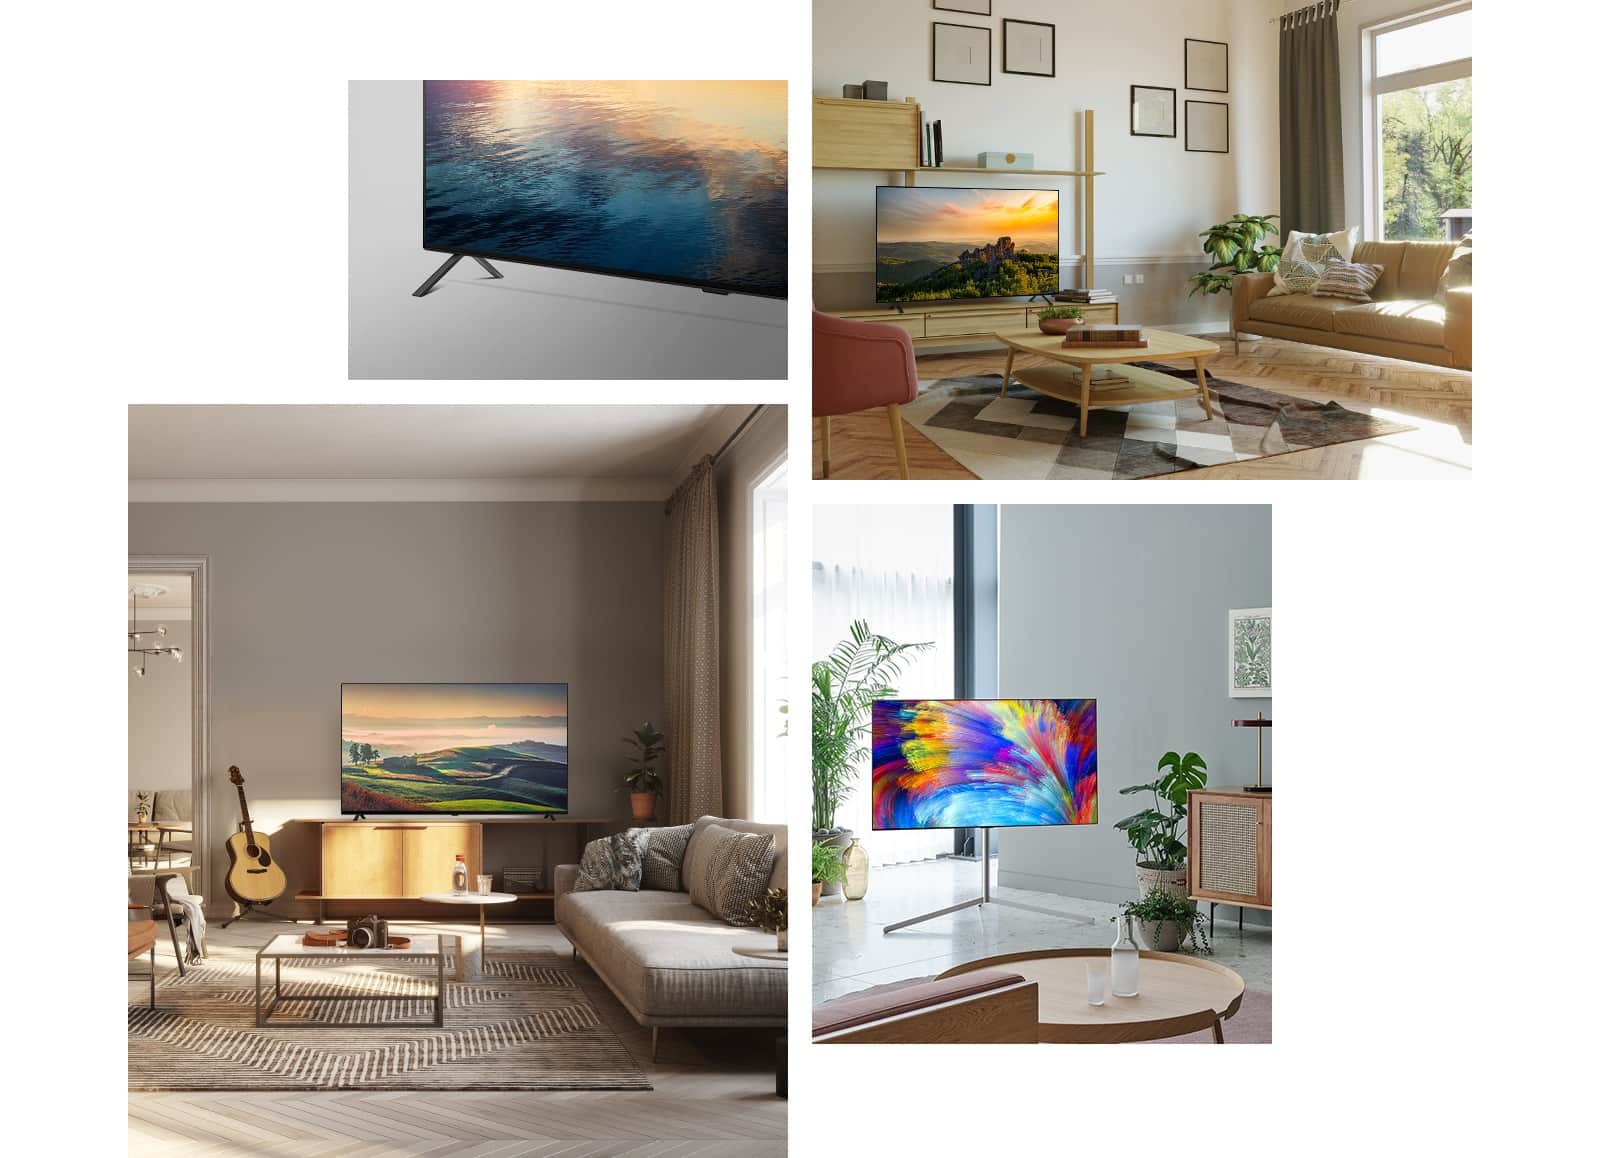 TV LG OLED55A26LA Resolution 4K 55 pouces - Electro Mall